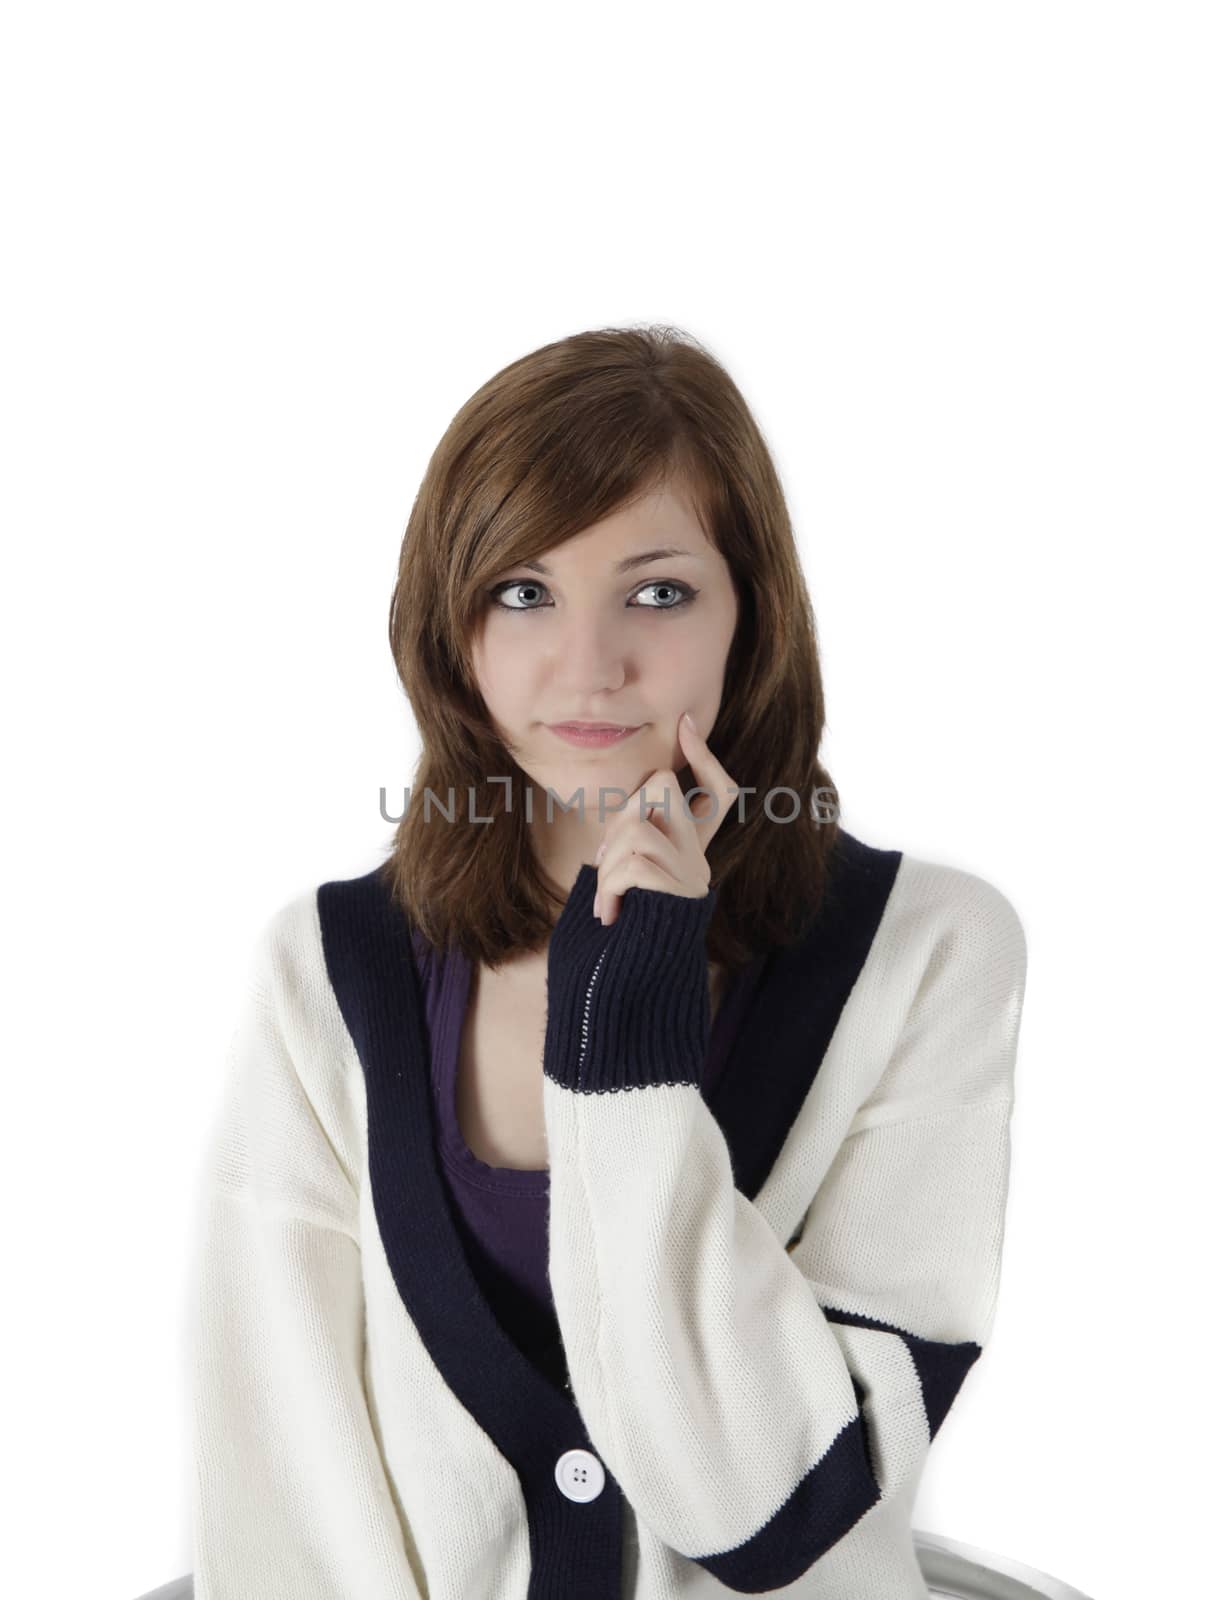 innocent young french woman on studio white background by macintox